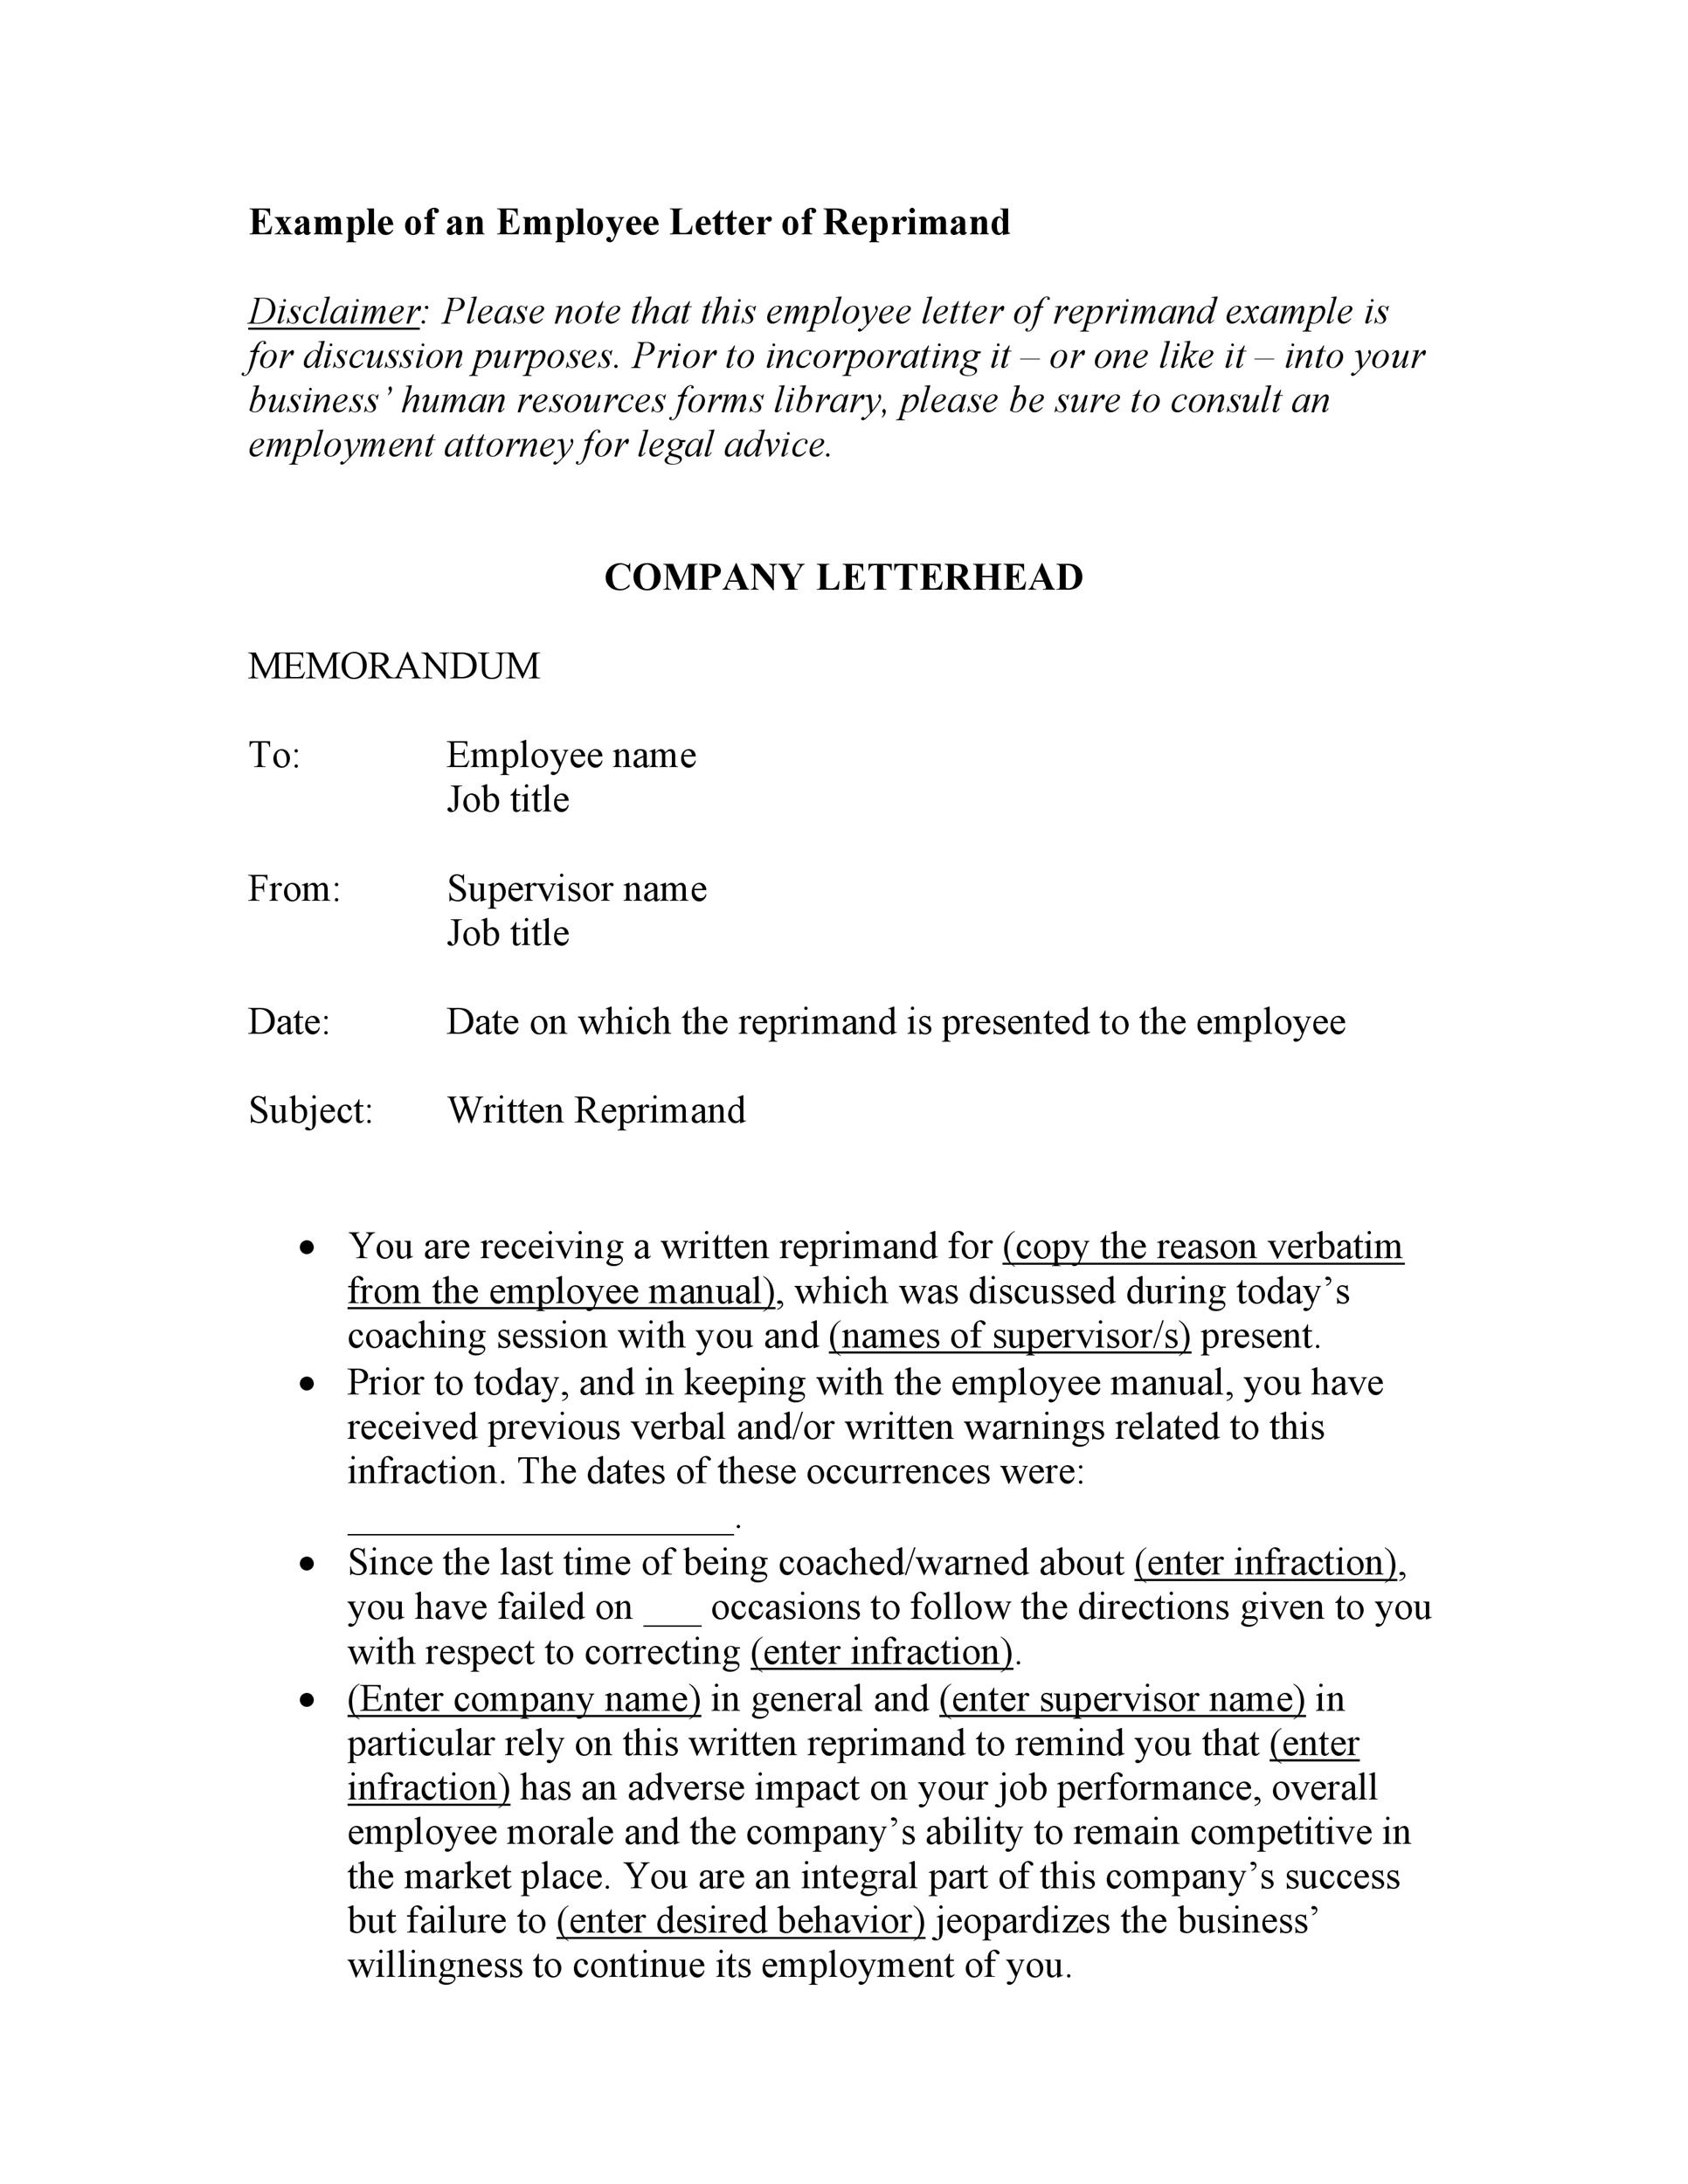 Sample Letter Of Reprimand For Misconduct from templatelab.com